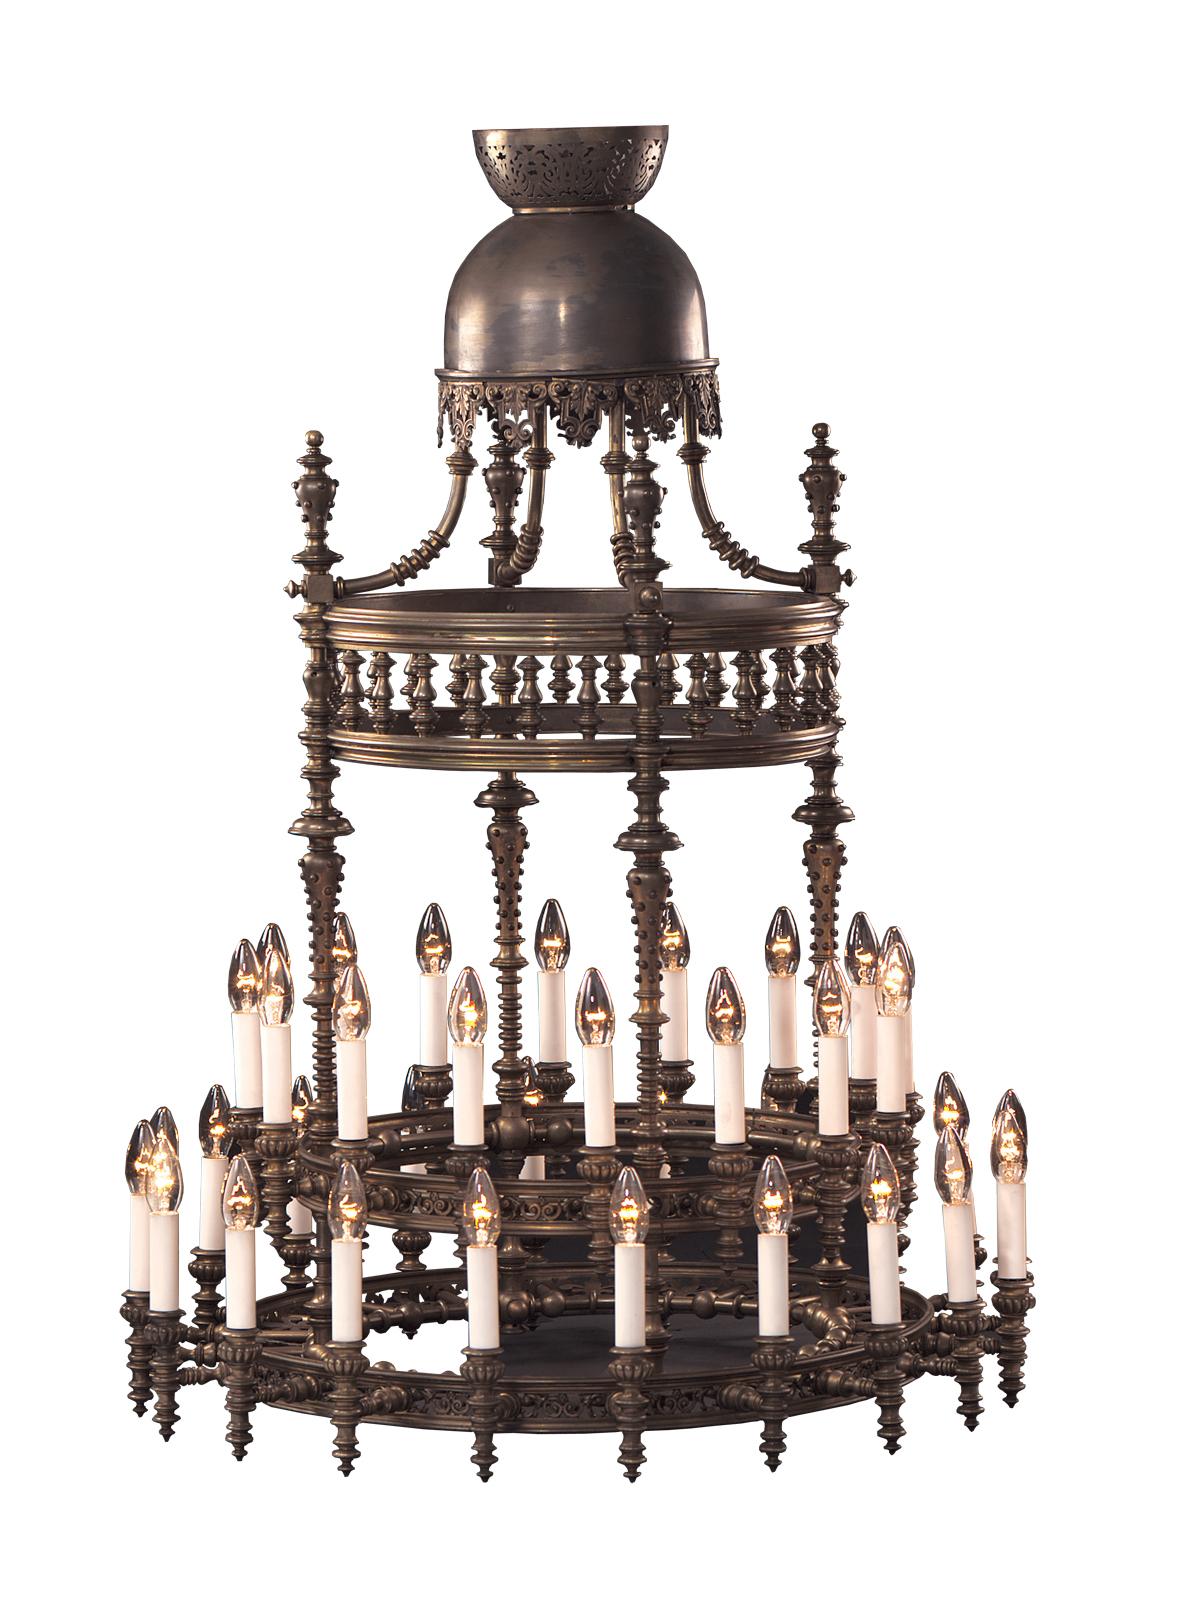 19th Century Original Documented Otto Wagner's Private Belonging Dining Room Chandelier For Sale